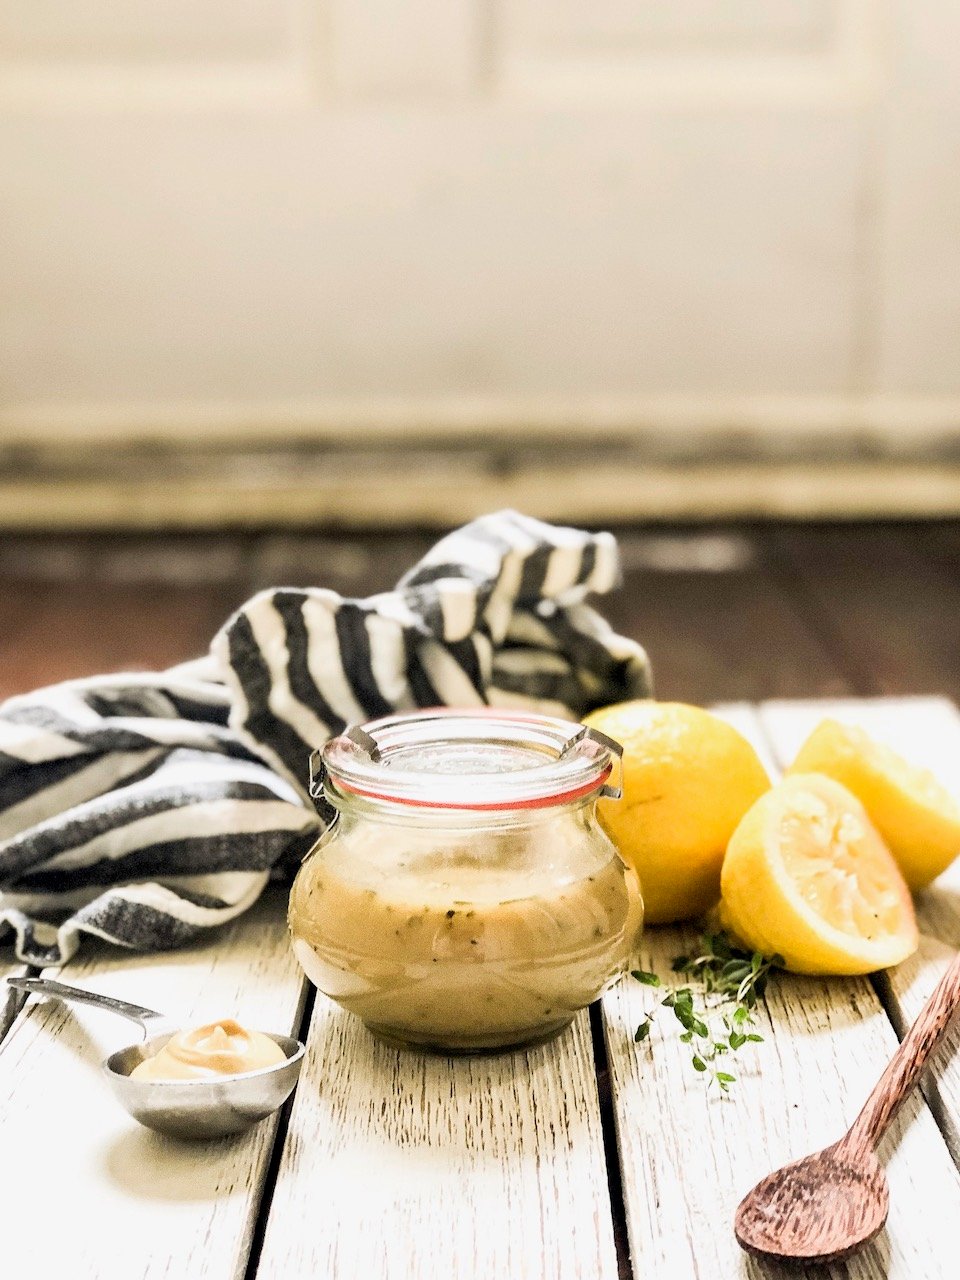 Lifestyle blogger Chocolate and Lace shares her recipe for Honey Lemon Dijon Dressing.